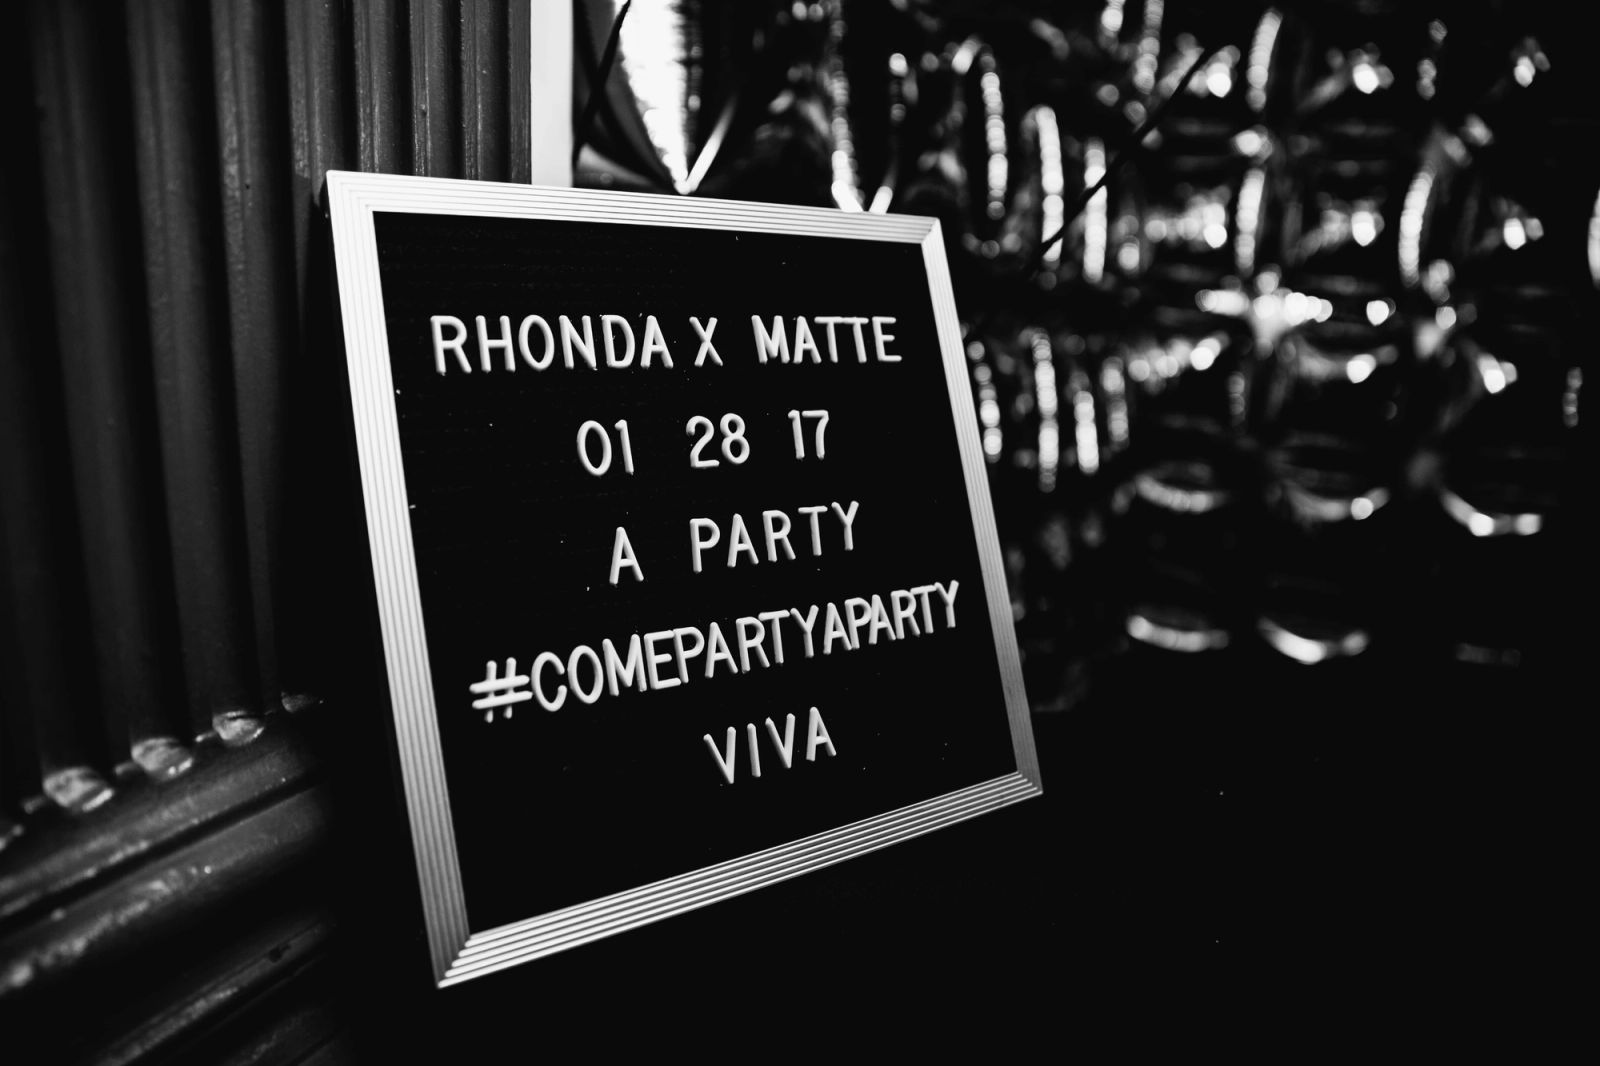 a-party-with-a-club-called-rhonda-matte-projects-image-11